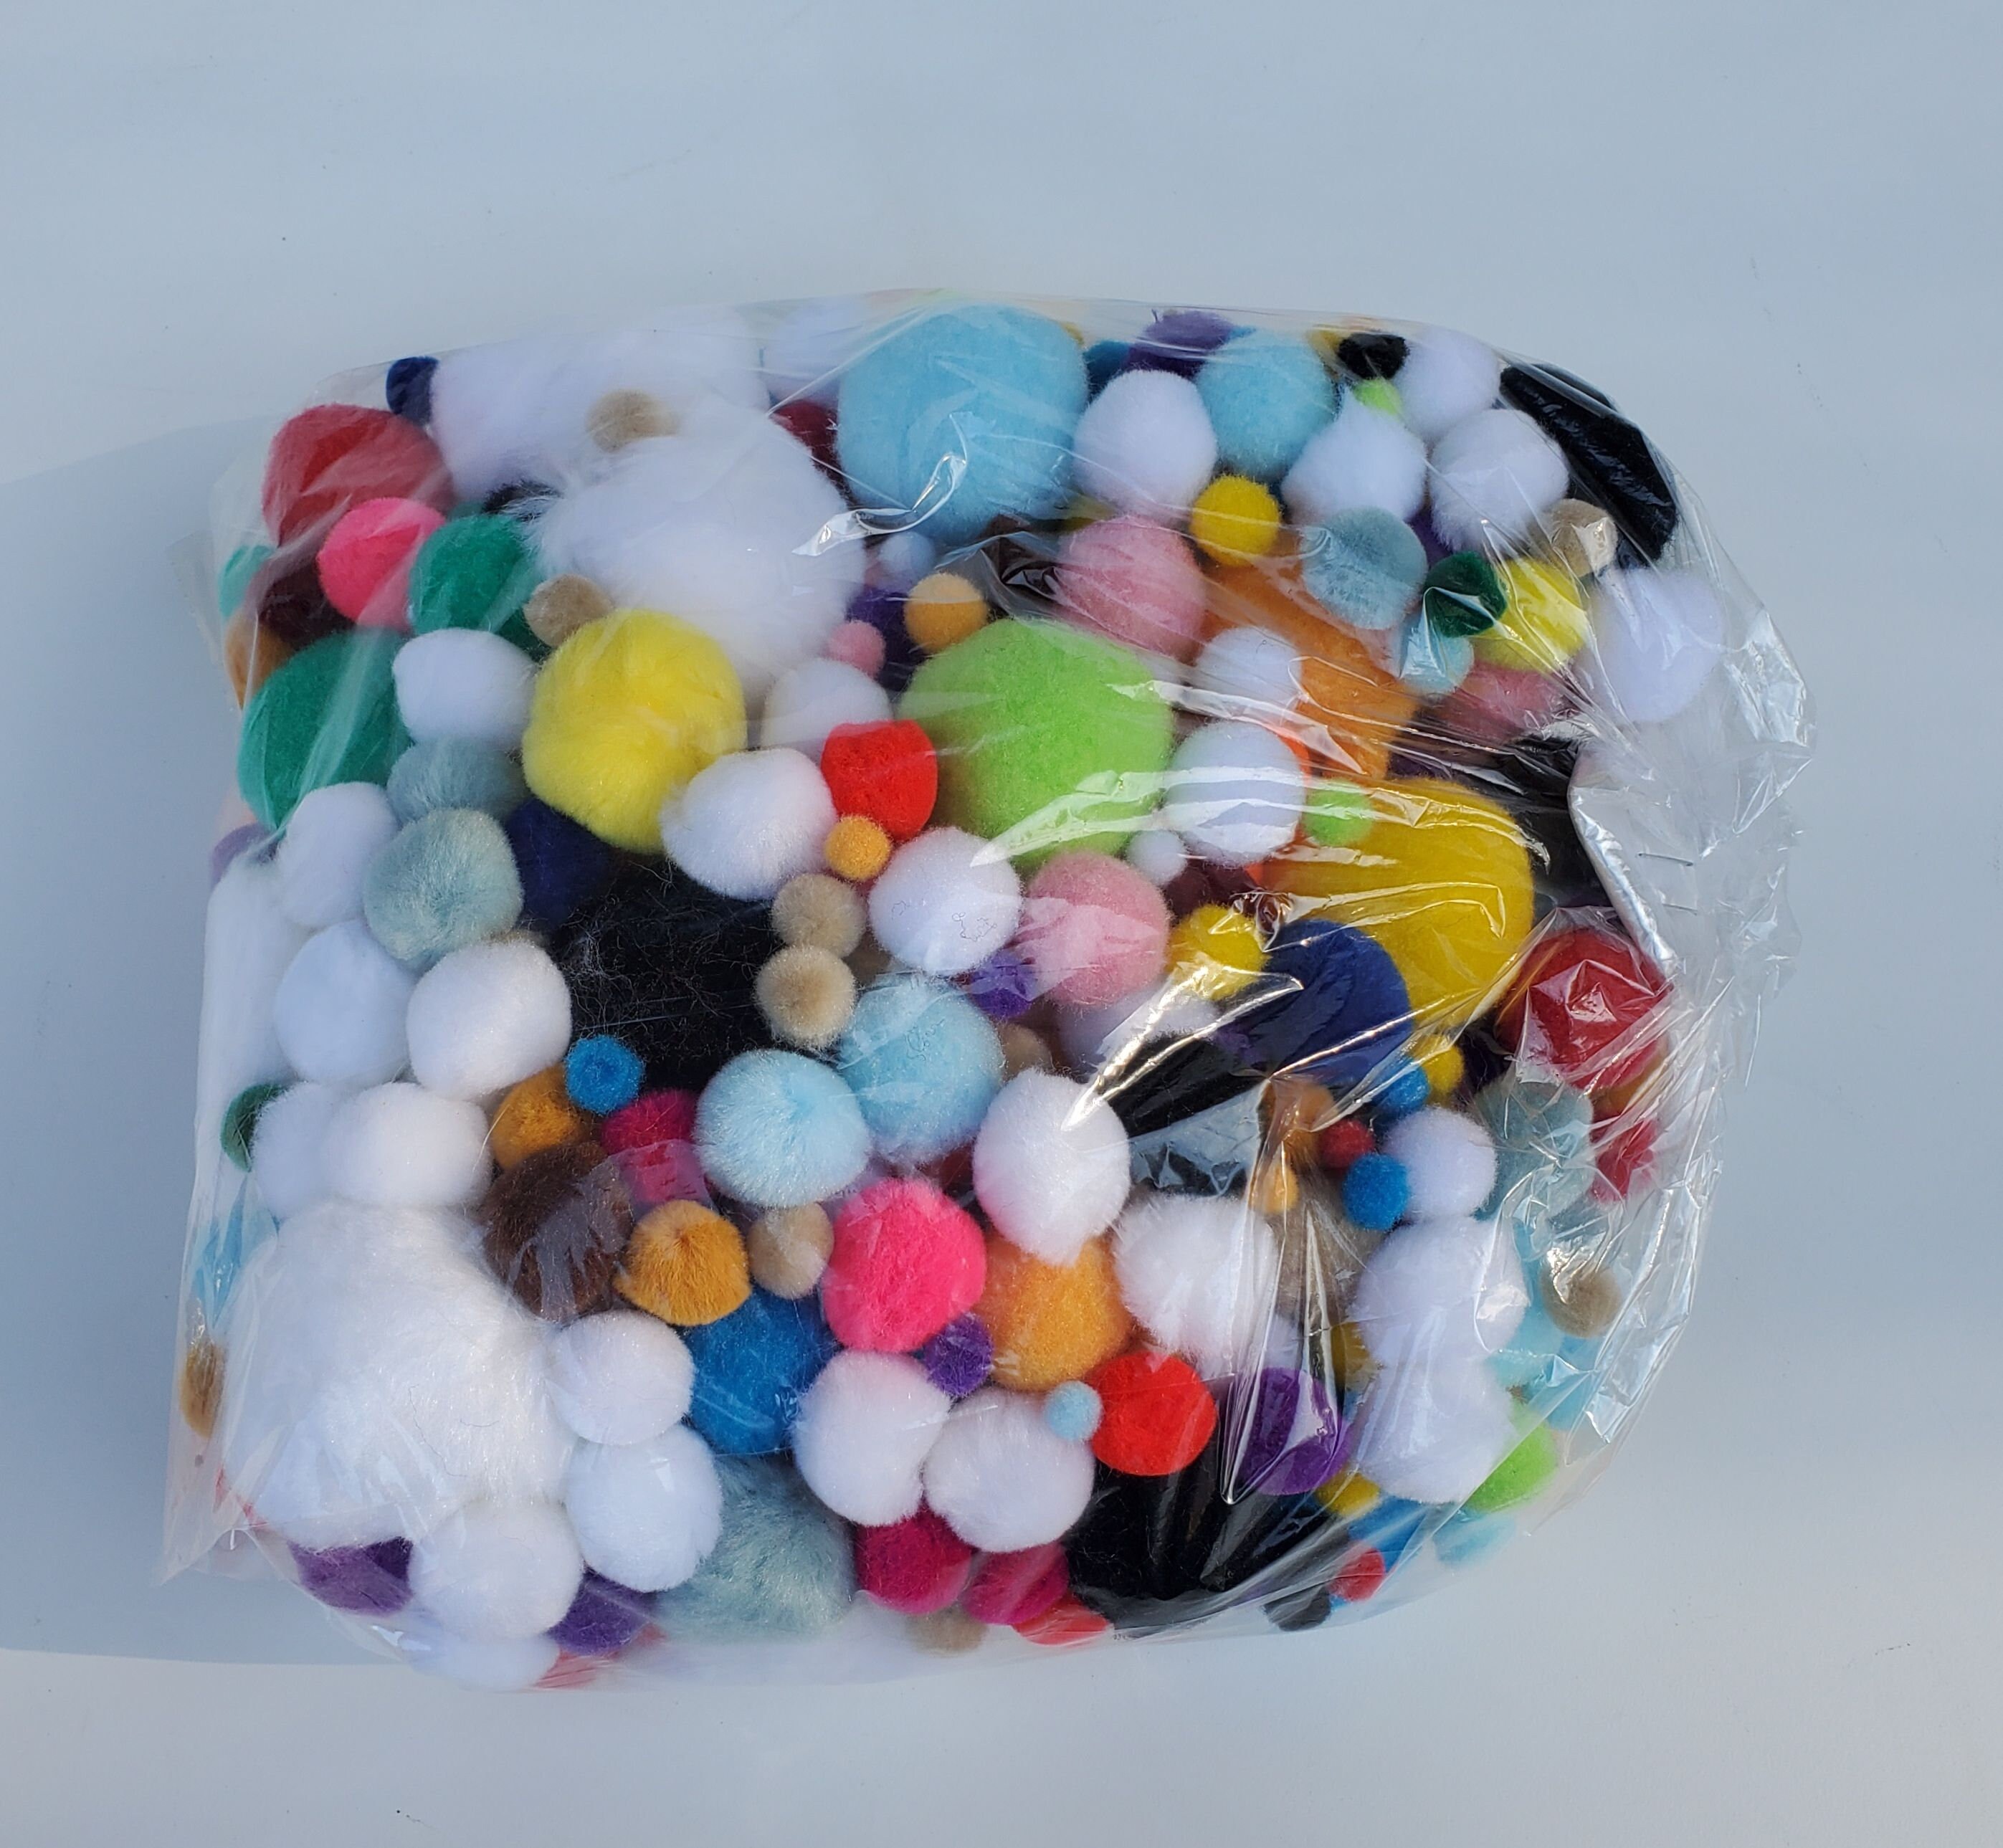 [250 Pcs ] 150 1 inch White Craft Pom Poms + 100 Multicolor Pom Pom Balls,  Small Pom Poms Assorted Pompoms for Crafts Projects and DIY Creative Crafts